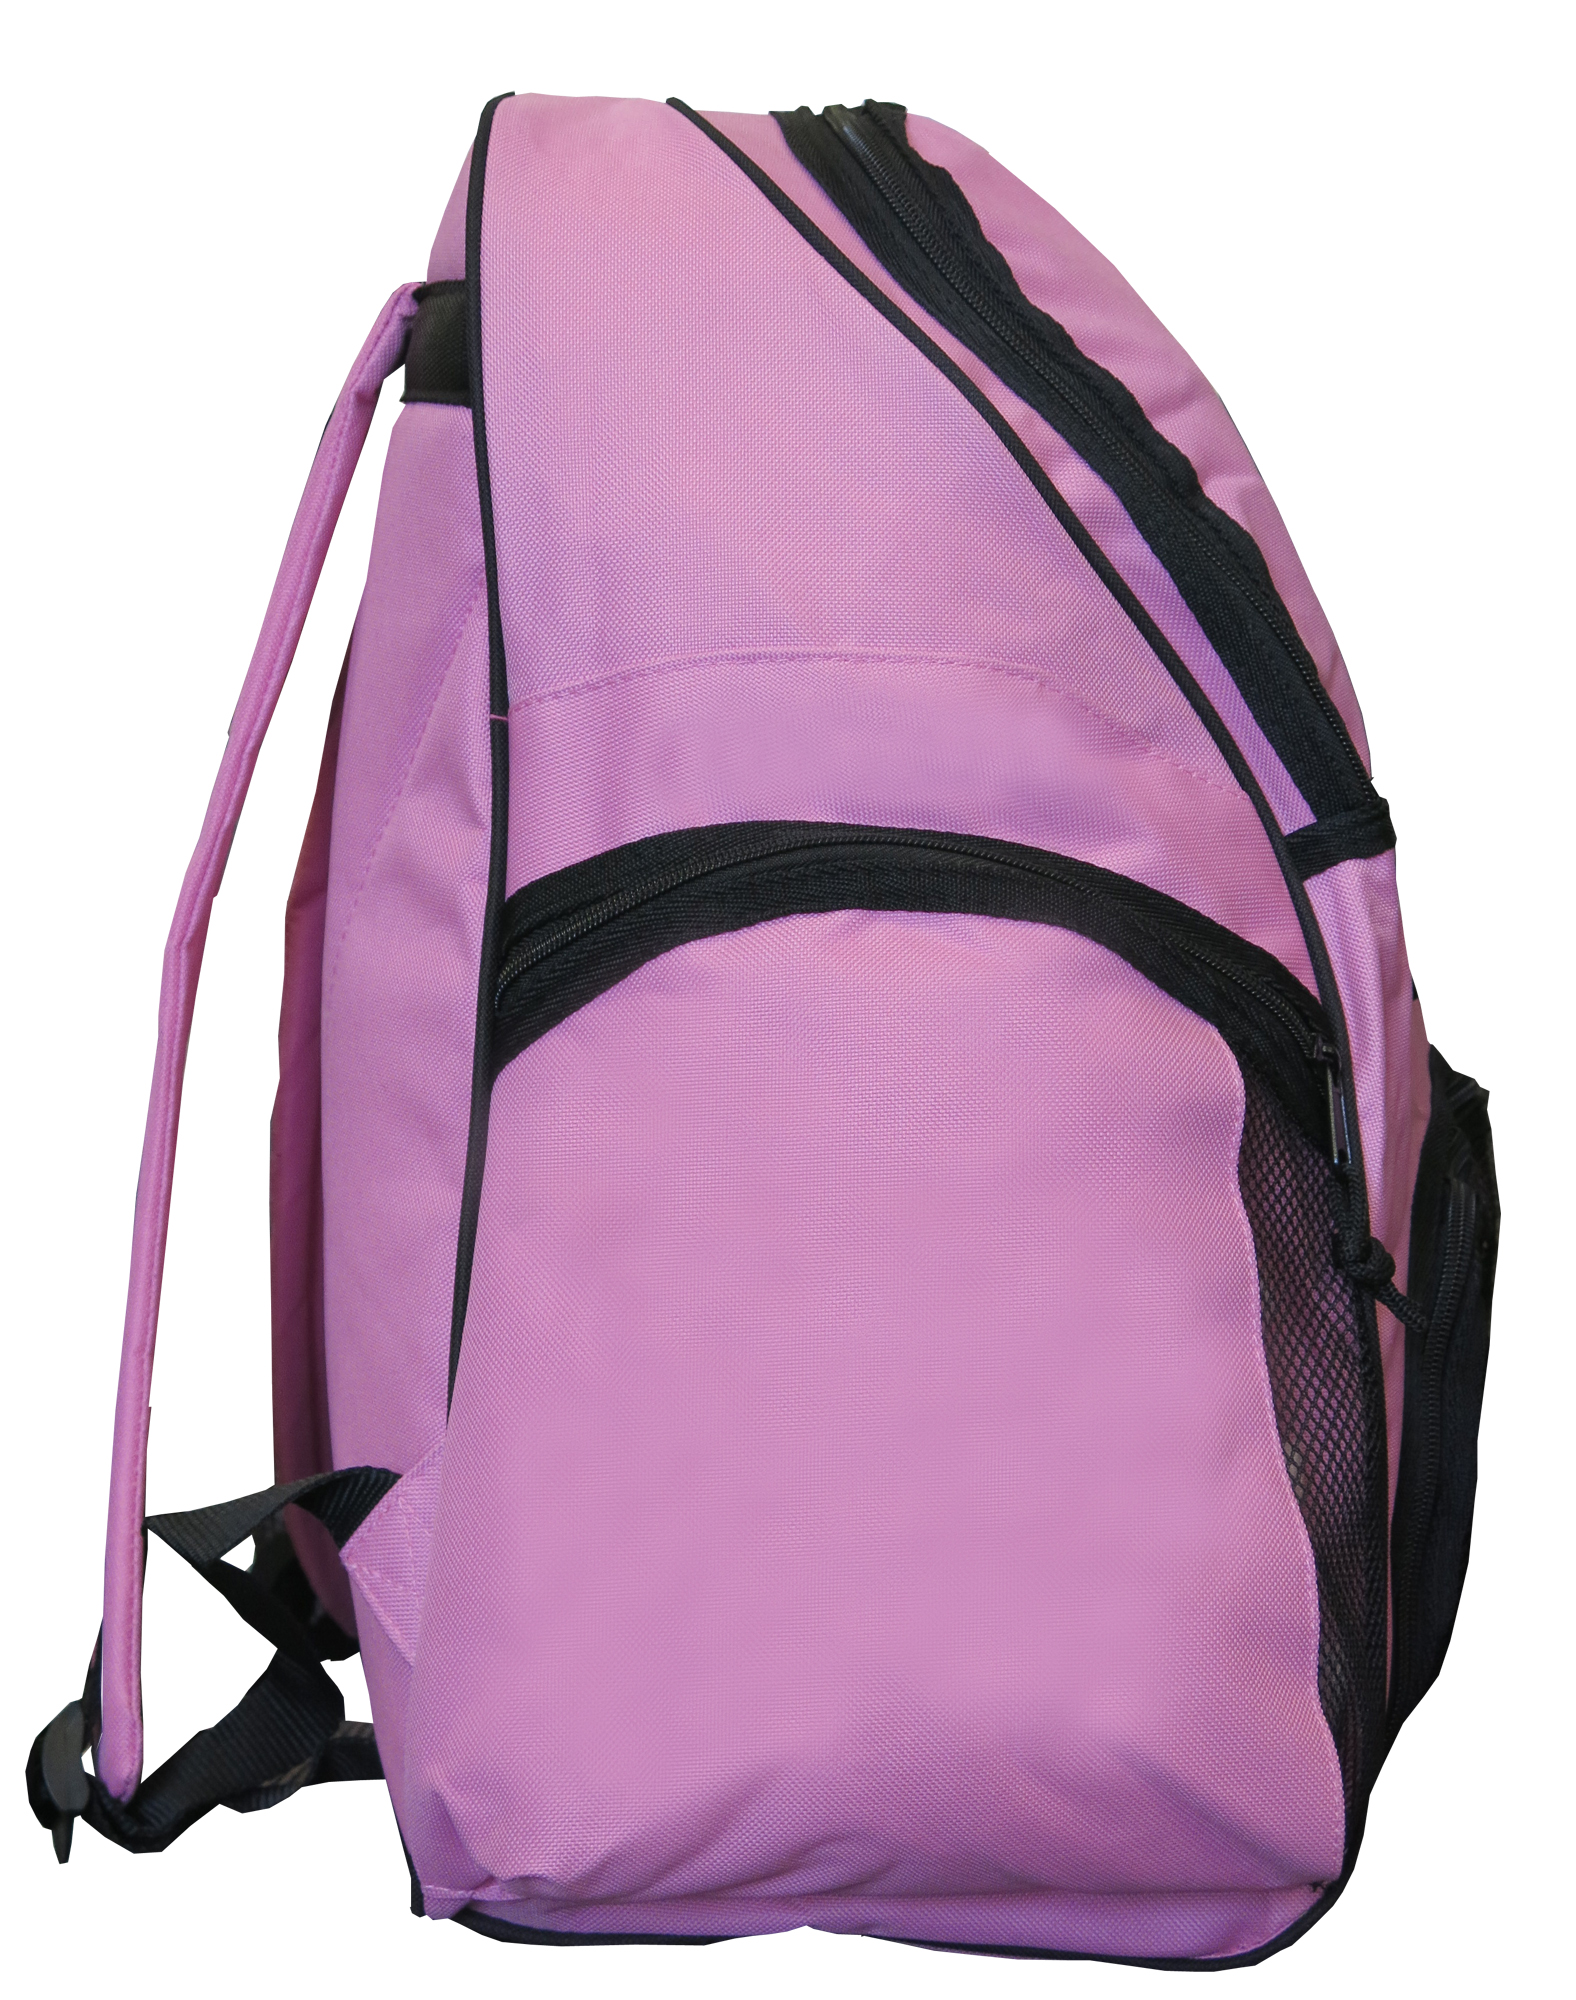 Girls Pink Flamingo Soccer Backpack or Womens Flamingo Volleyball Bag - image 4 of 4